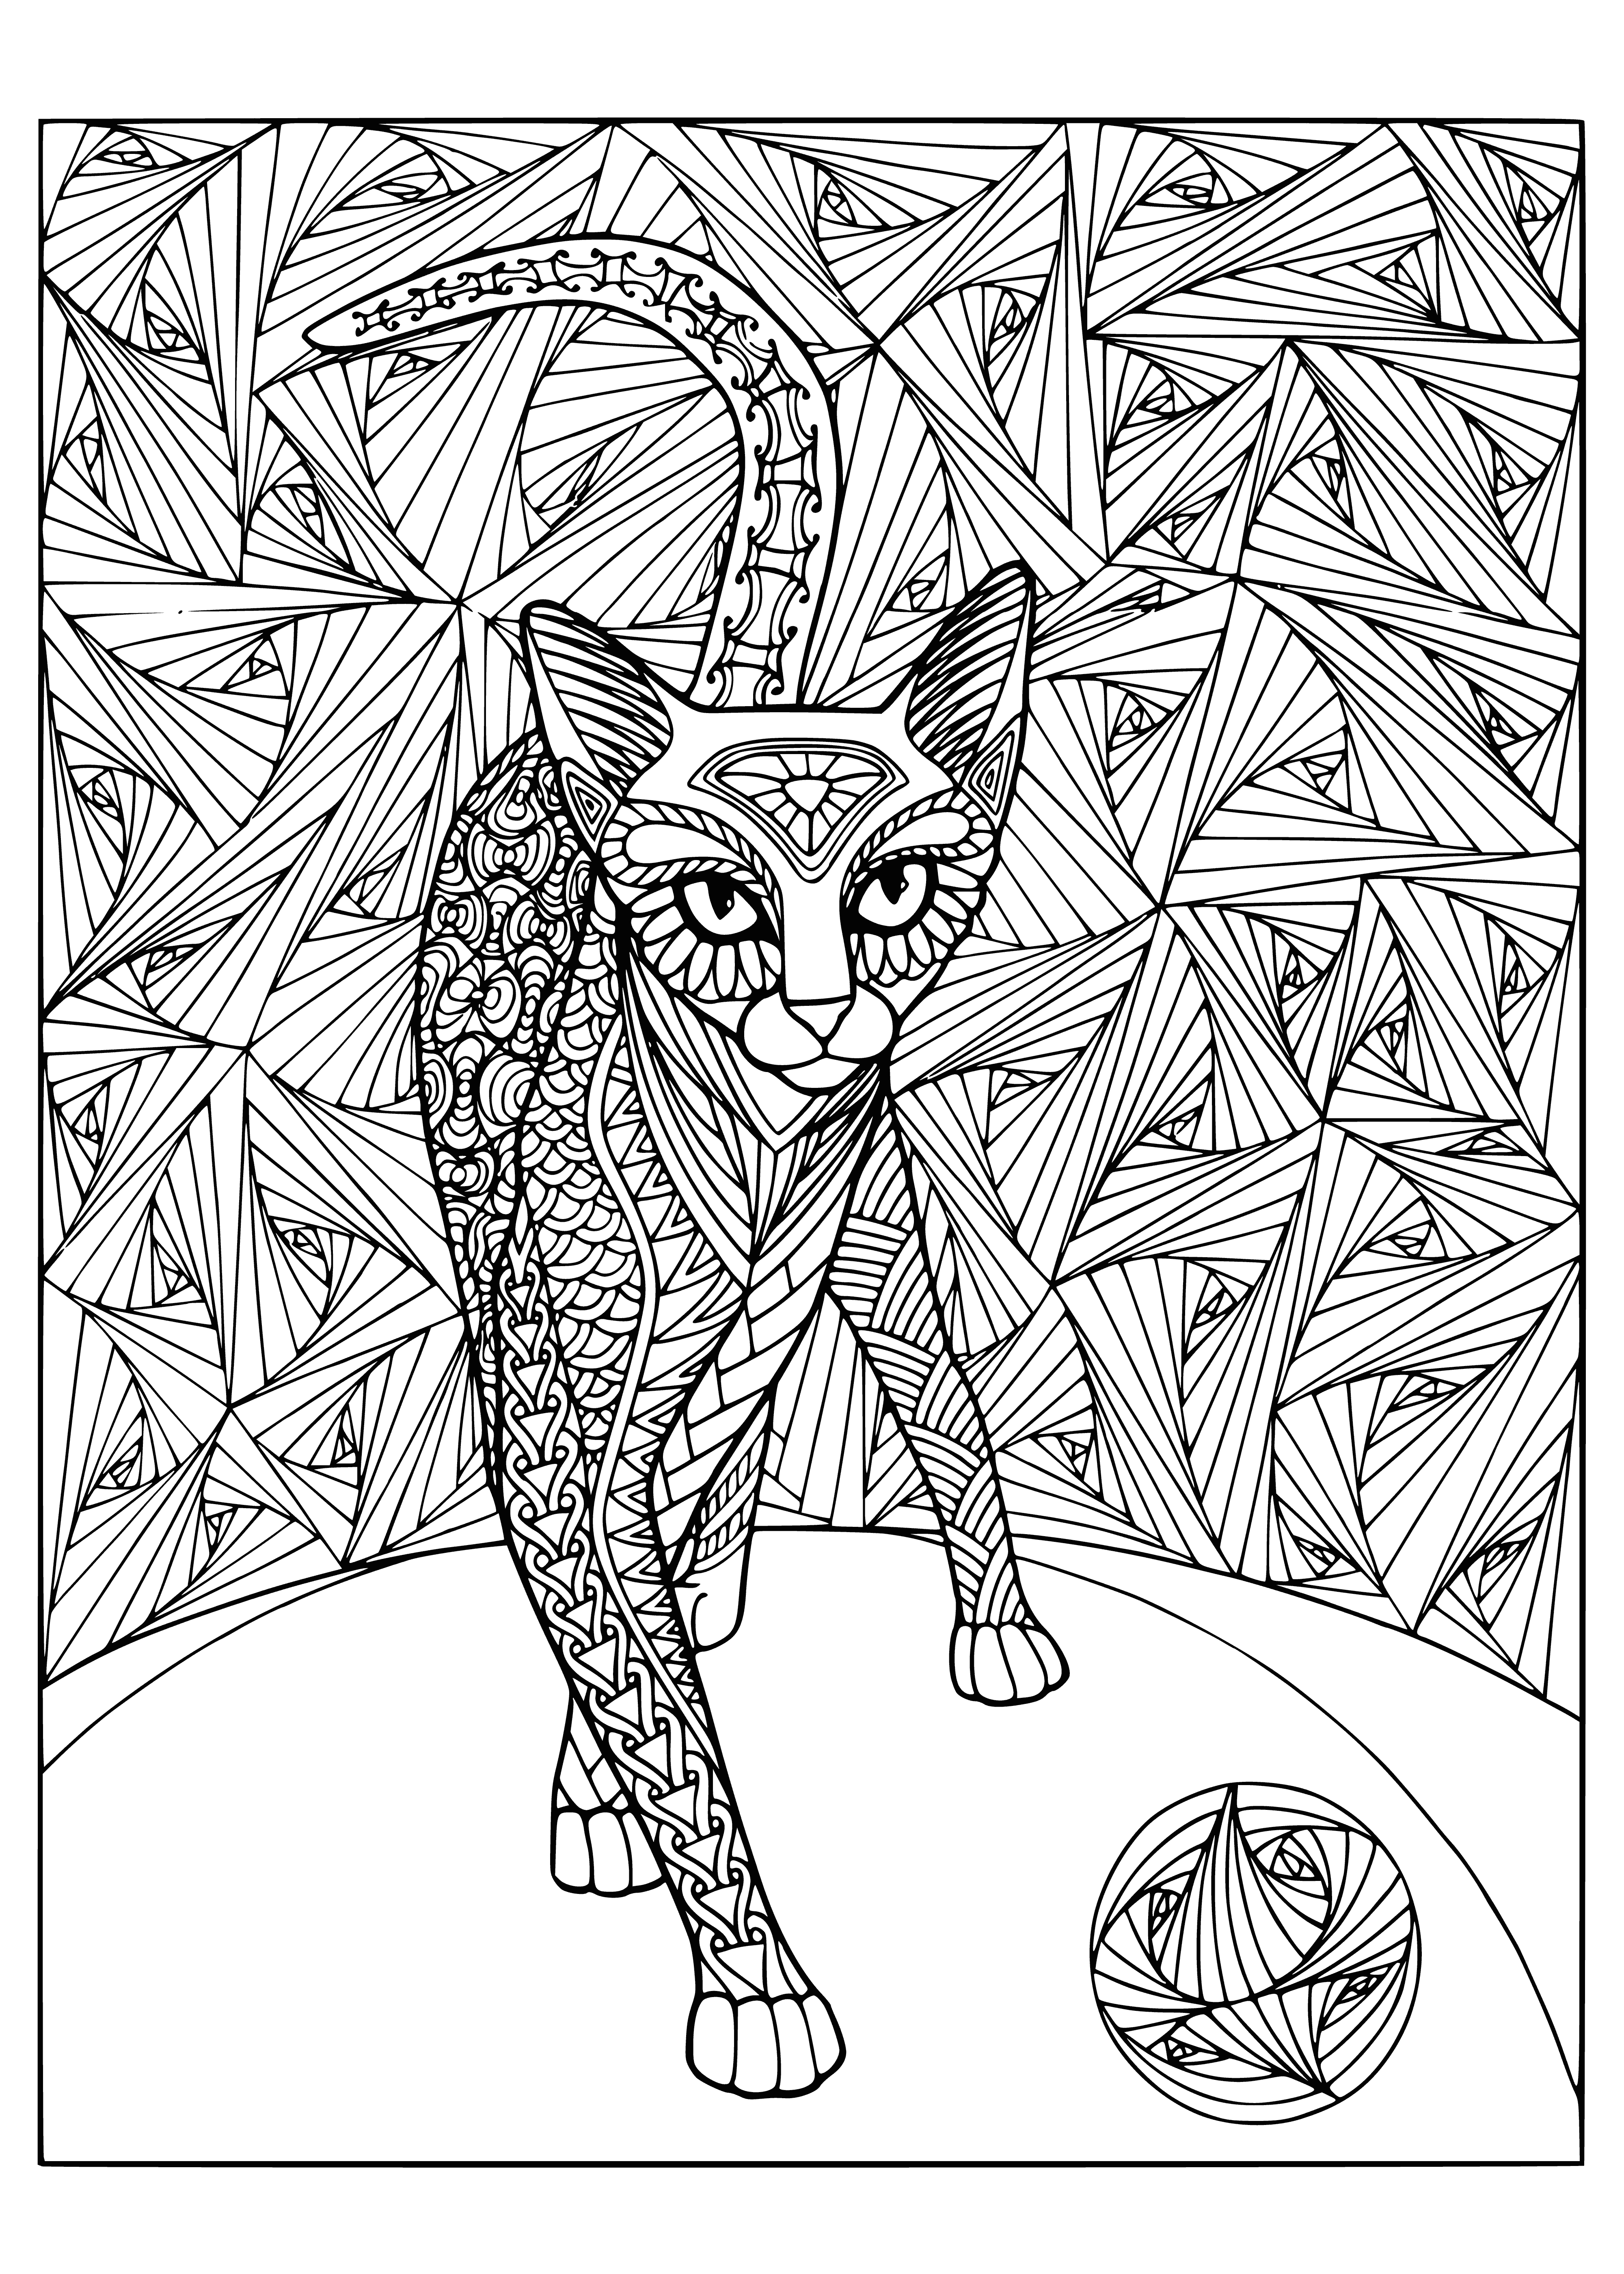 coloring page: Cat chases blue ball, bouncing around and bringing fun.